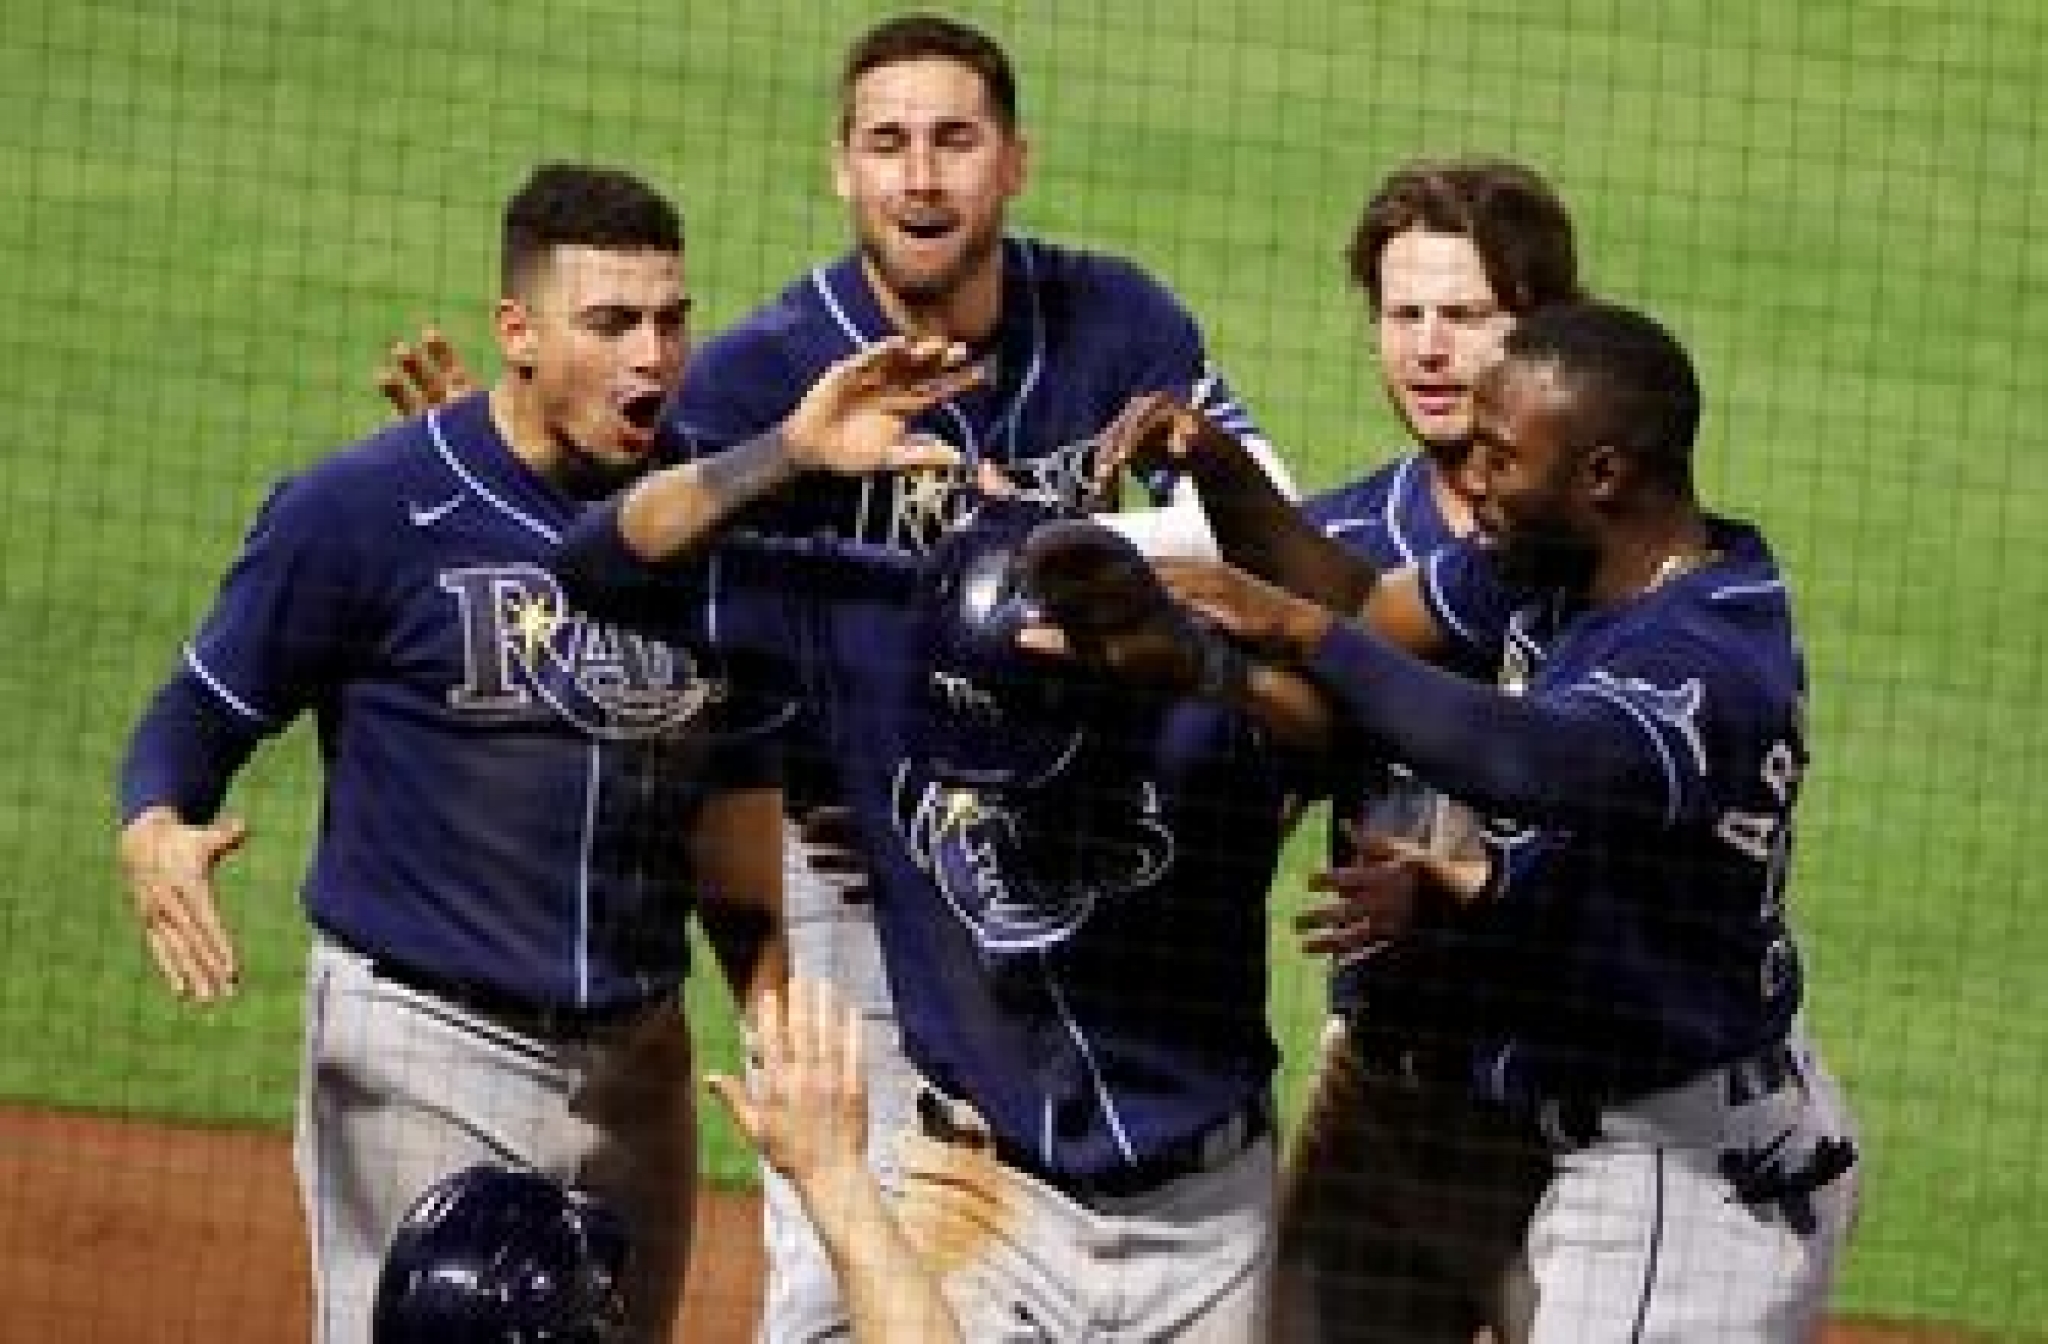 Rays extend win streak with come from behind win over Angels, 8-3